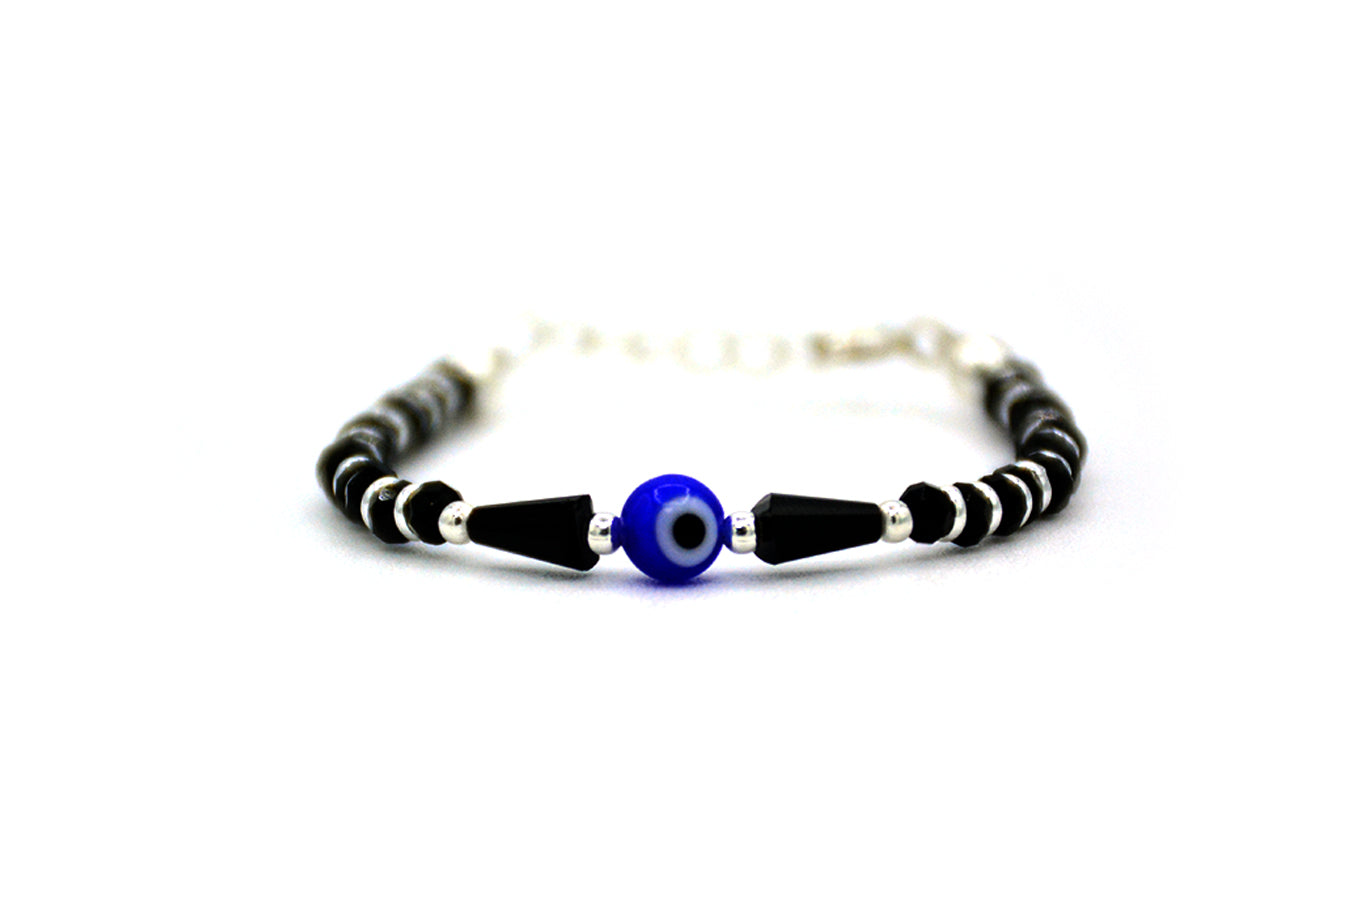 925 Sterling Silver Baby Bracelet with Black Beads, Silver Rings, Triangular Black Beads Around Evil Eye